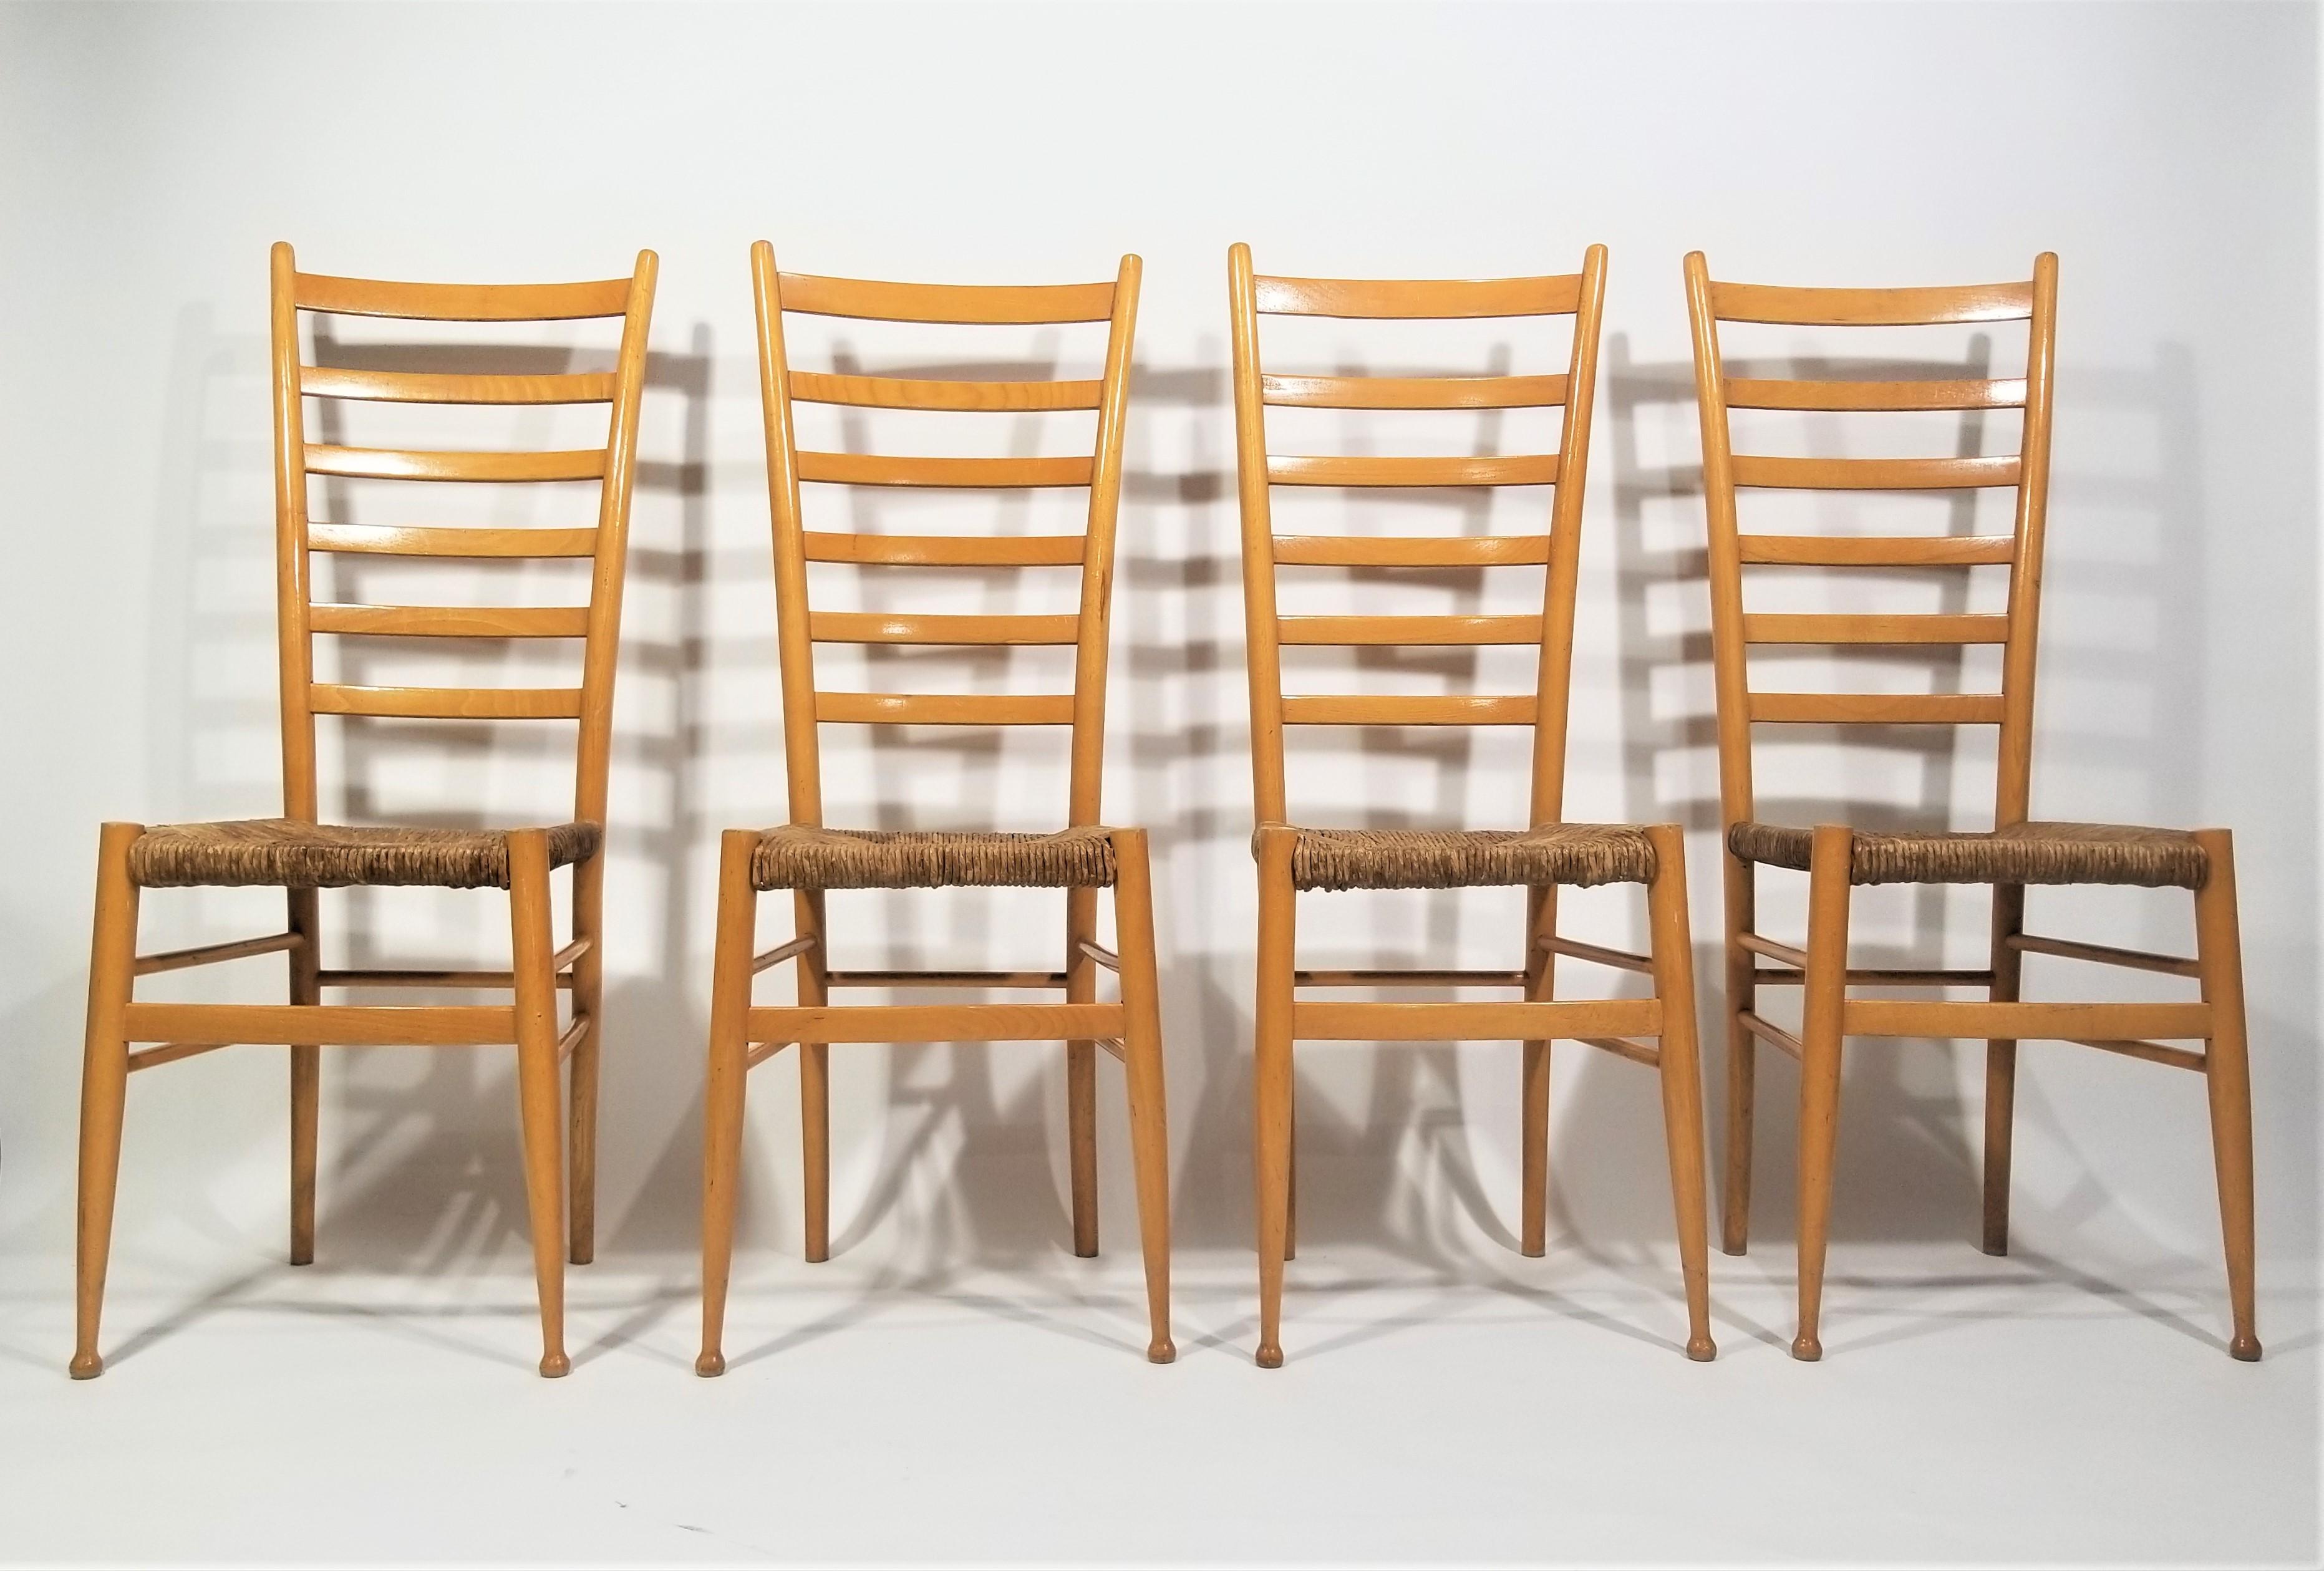 1970s Mid Century Italian Tall Ladder Back Chairs in the style of Gio Ponti. Made in Italy. Set of 4. 

Lightweight and easy to move. Wear consistent with age and use. 